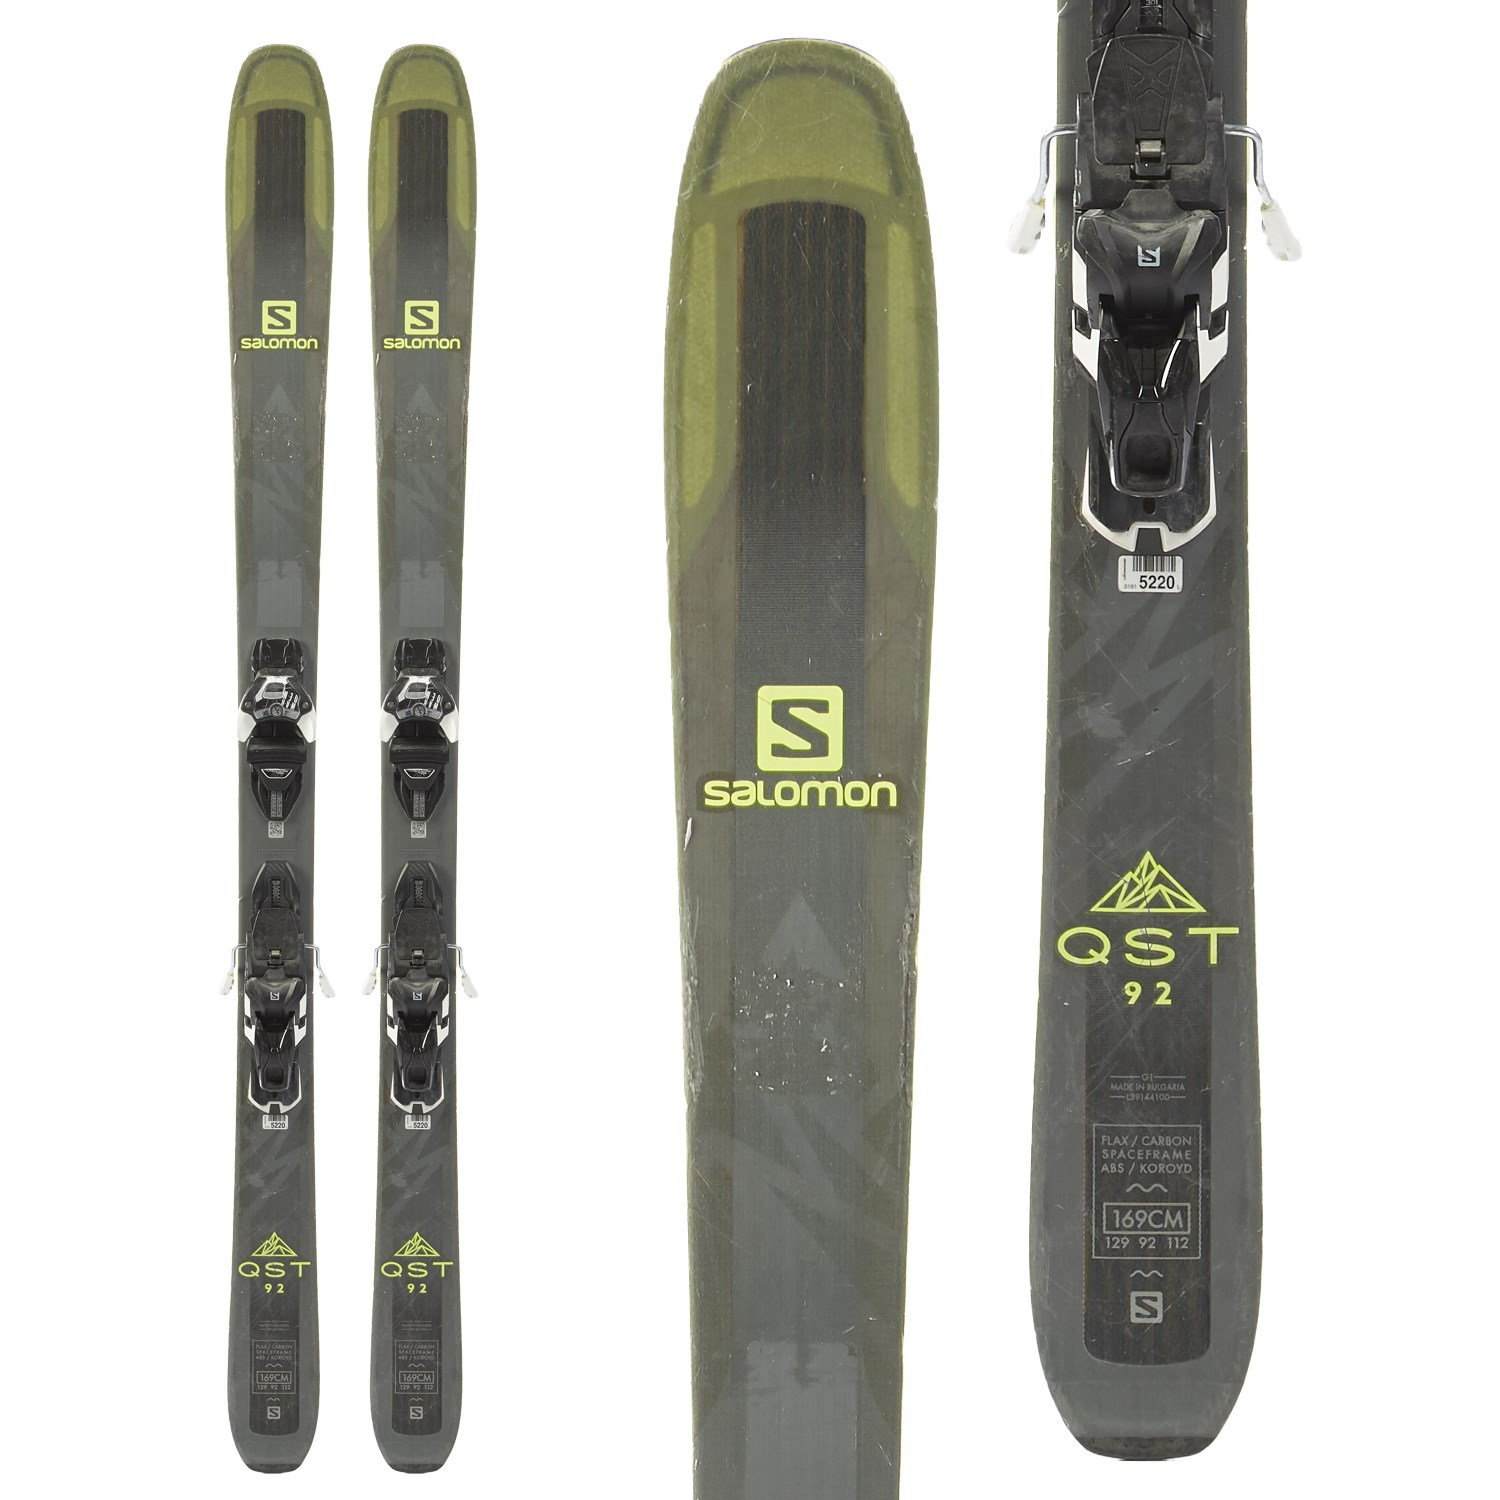 Used 2018 Salomon QST 92 Skis with Warden 13 Bindings Silver Condition